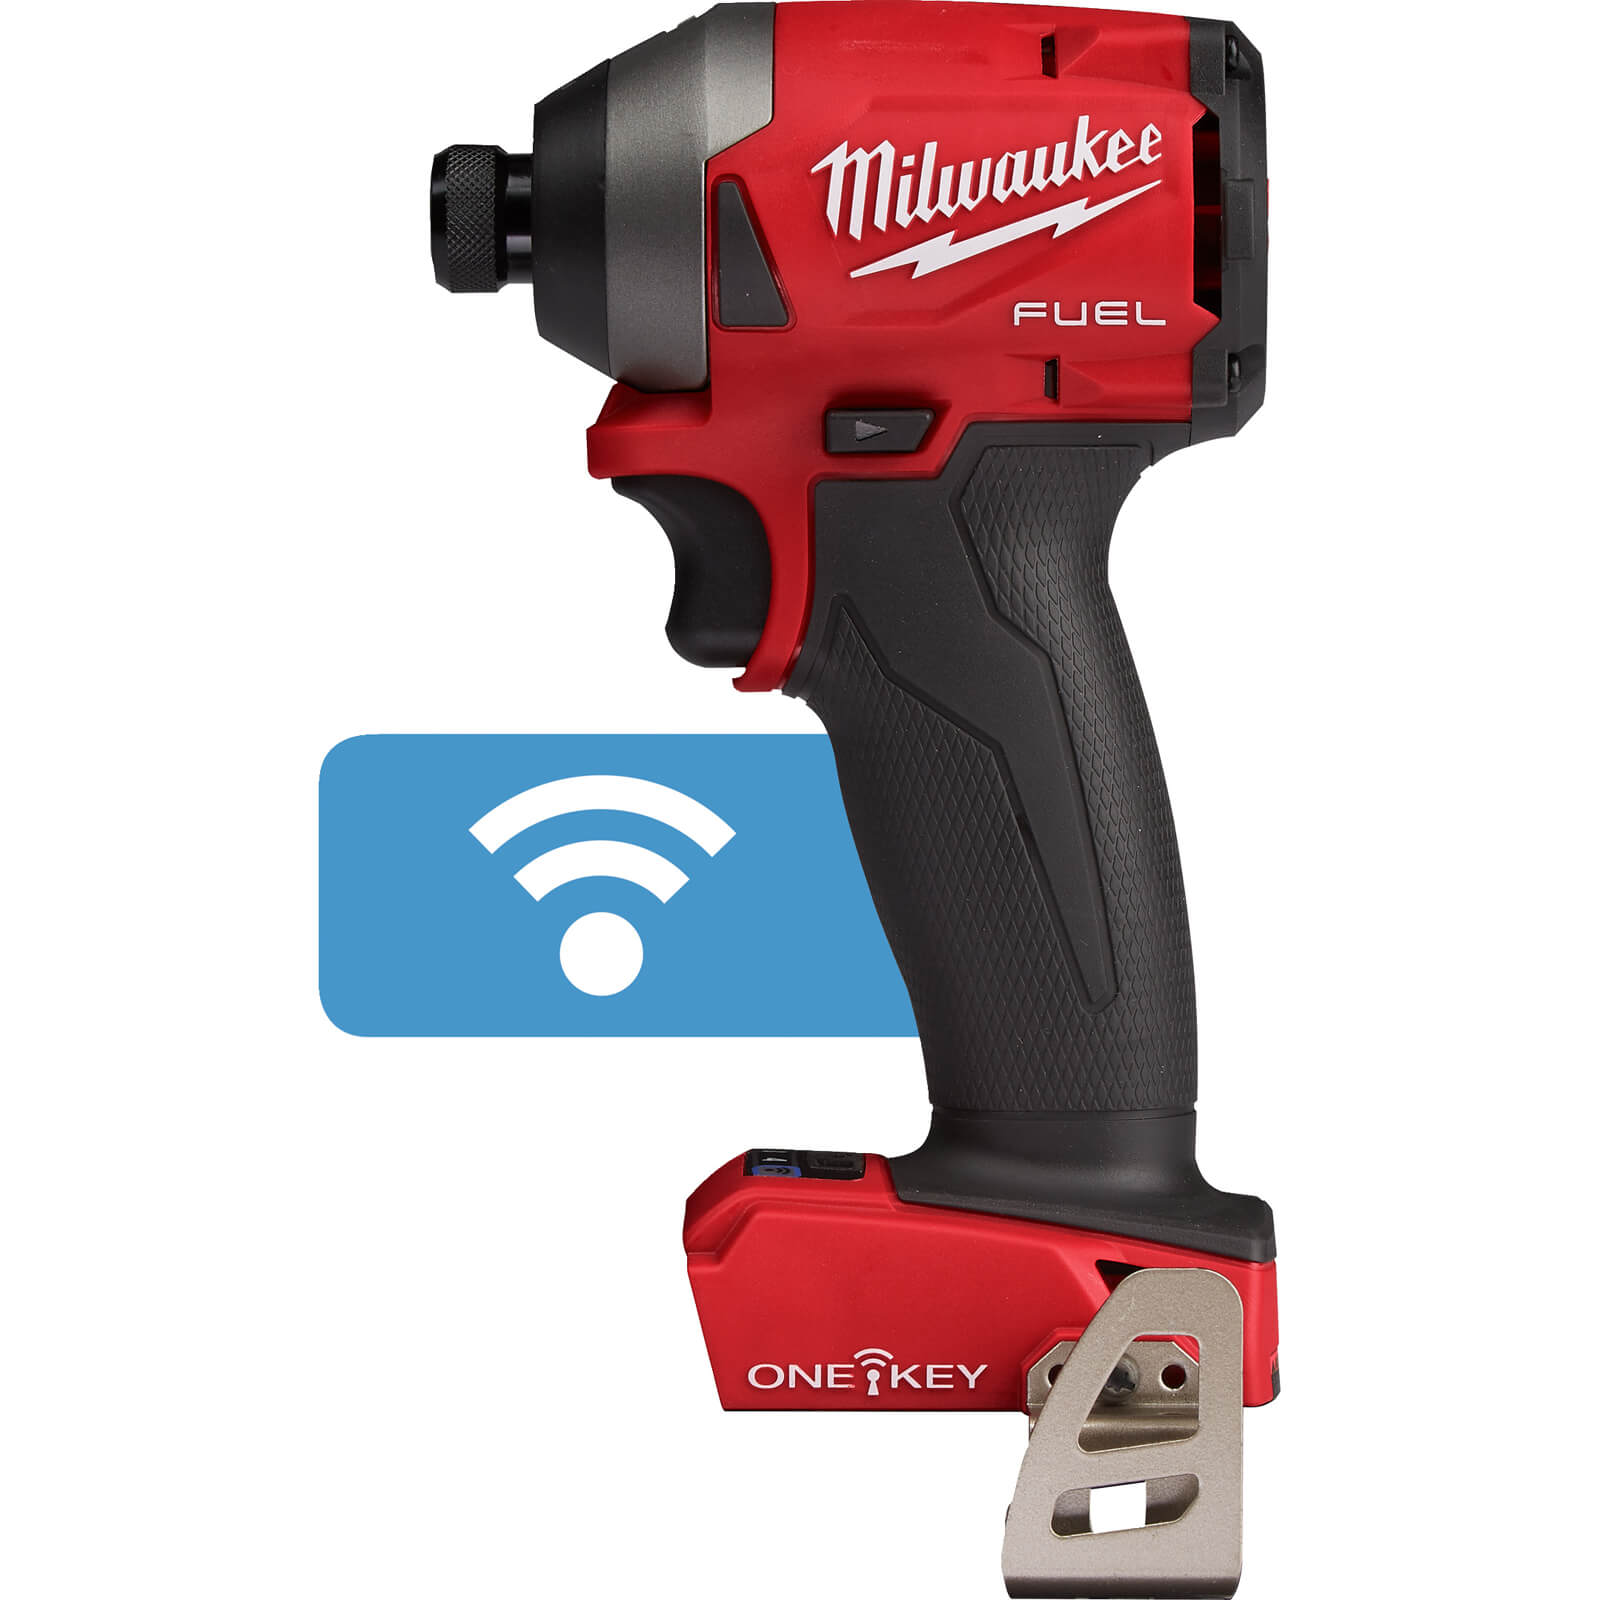 Image of Milwaukee M18 ONEID2 Fuel 18v Cordless Brushless Impact Driver No Batteries No Charger Case